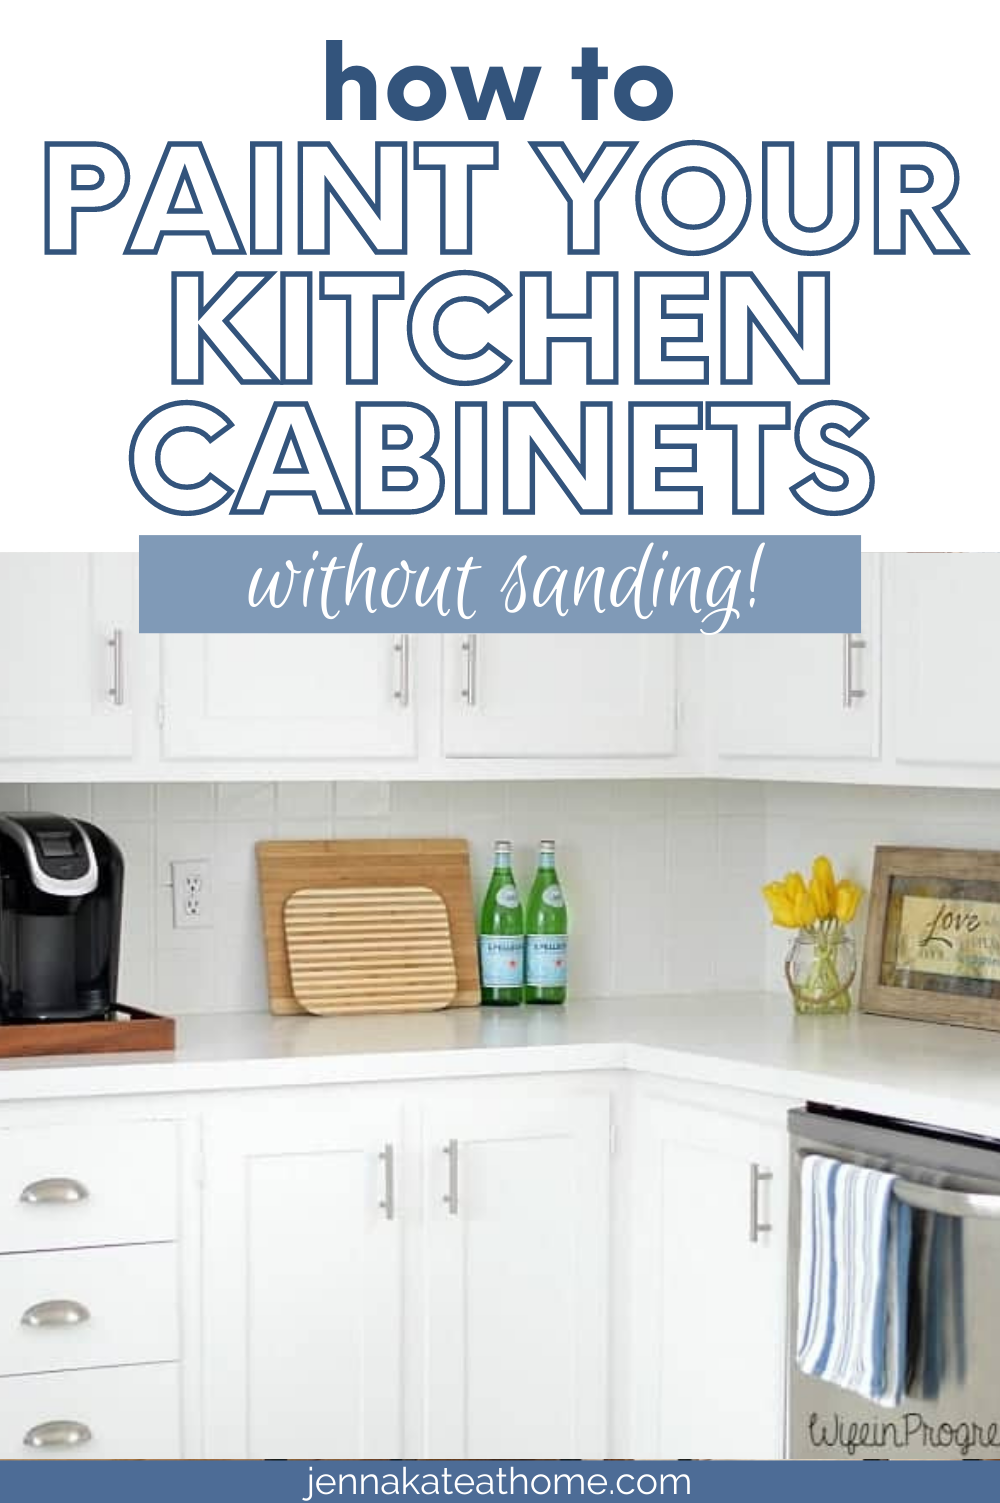 How to paint your kitchen cabinets without sanding